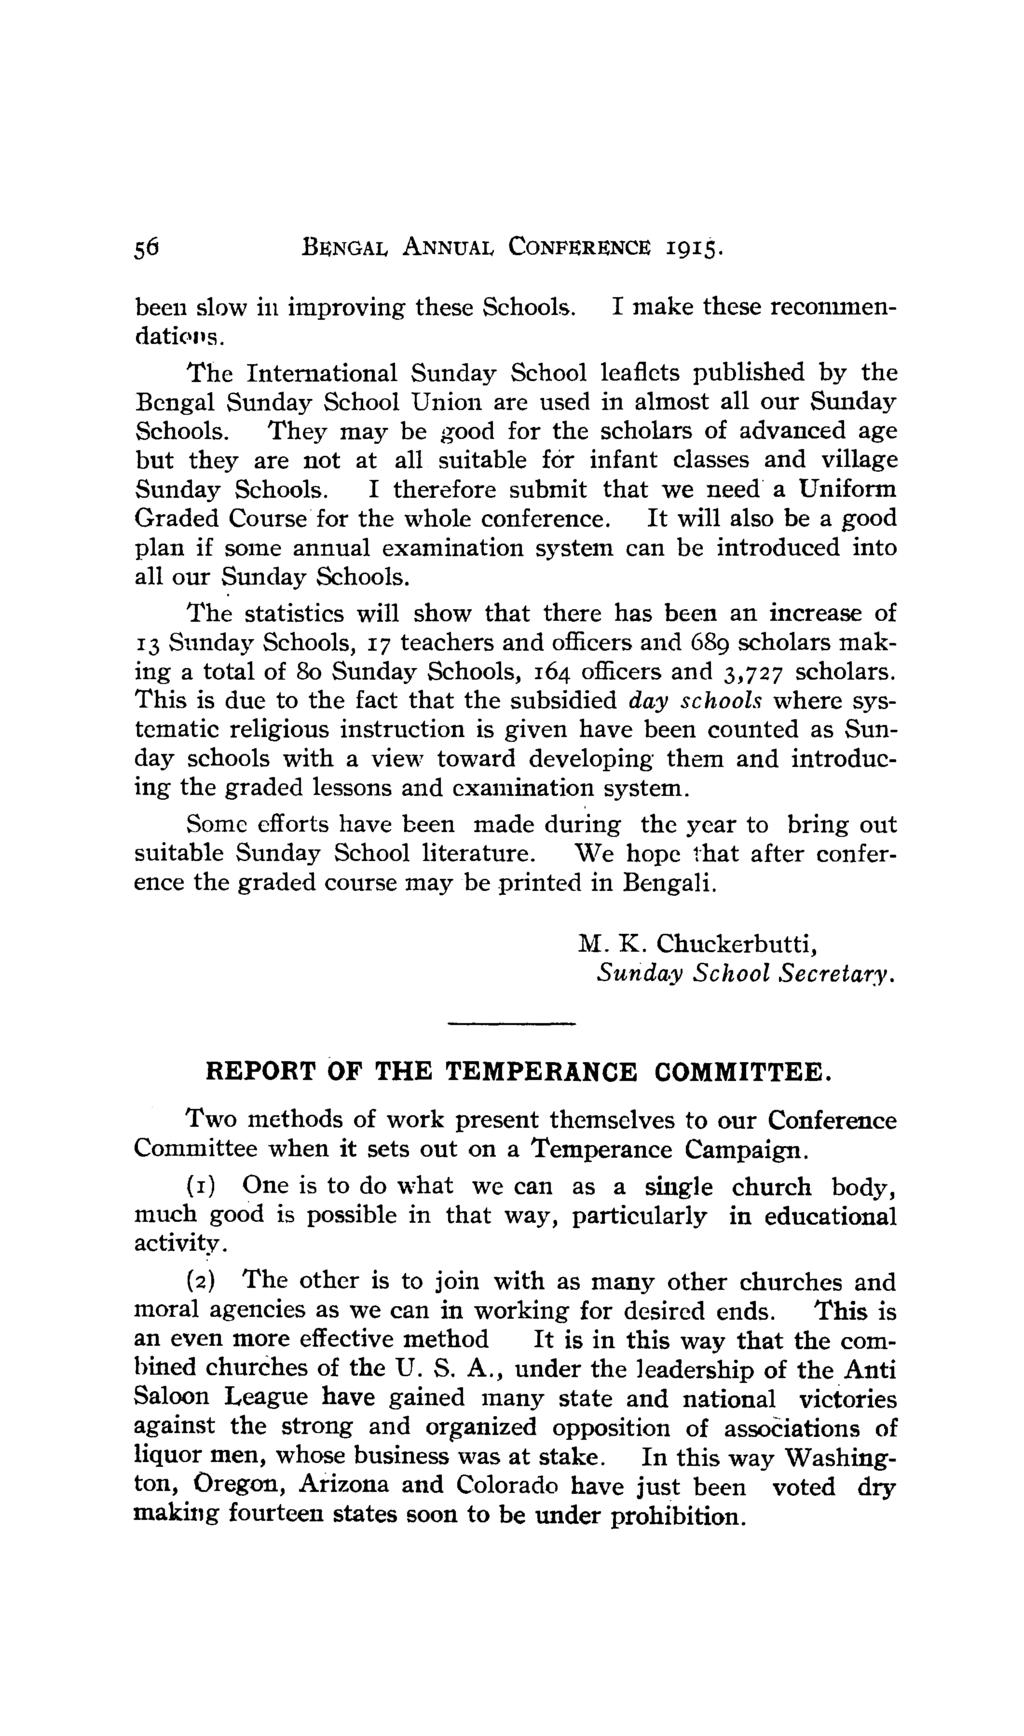 56 BENGAL ANNUAL CONFERENCE 1915. been slow ill improving these Schools. make these recommendati("'s.